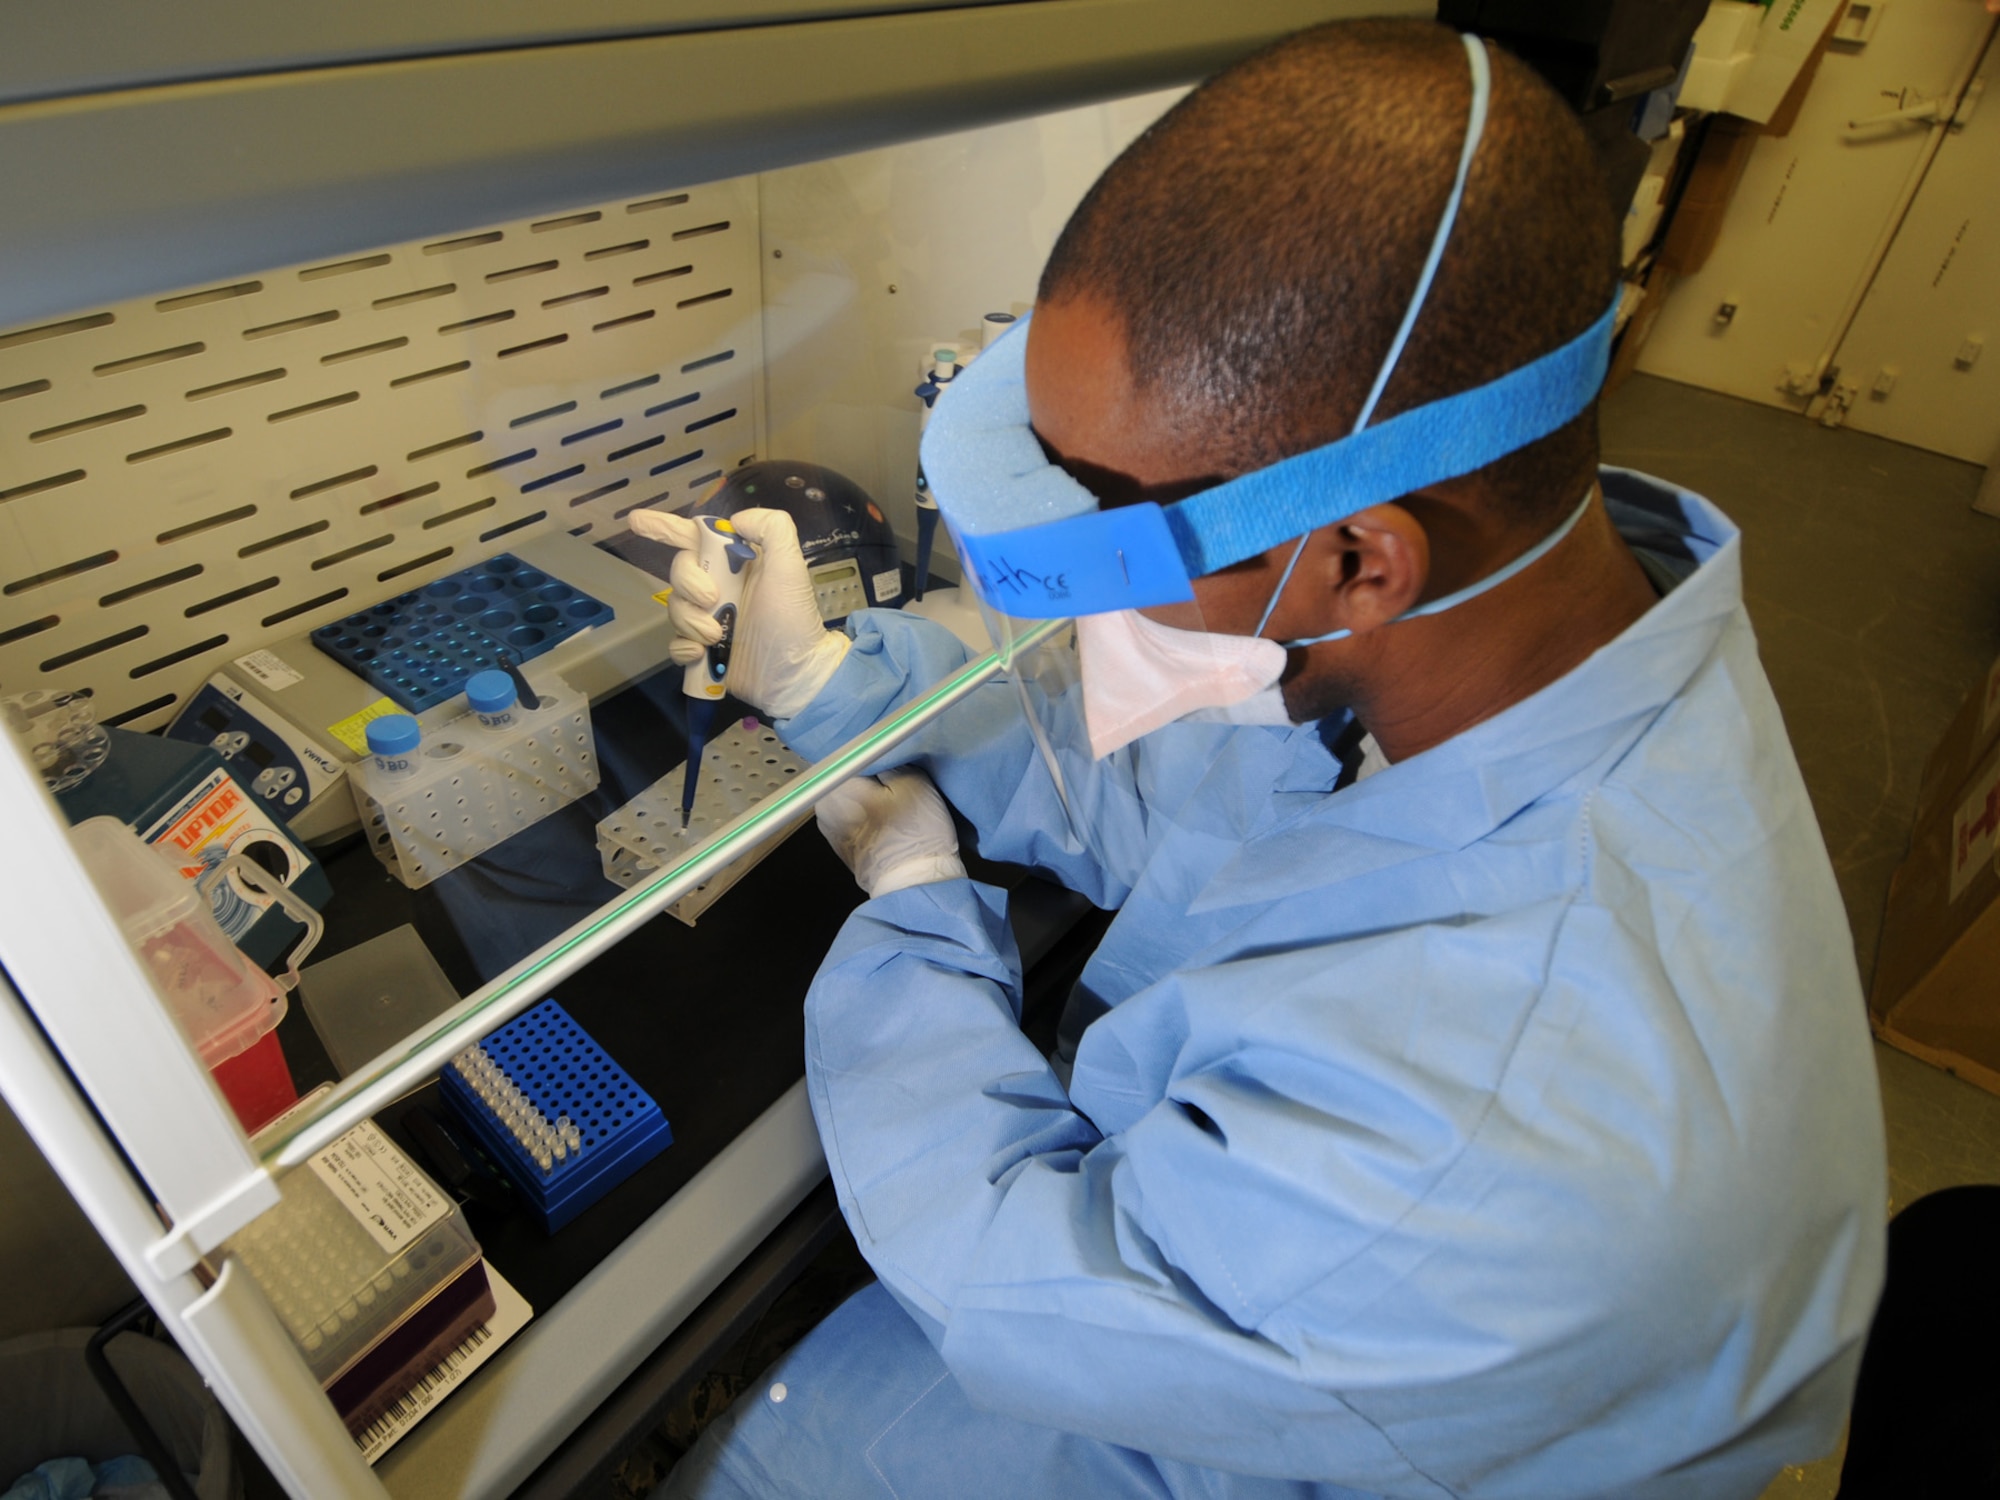 U.S. Air Force Tech. Sgt. Vernon Smith, 379th Expeditionary Medical Group biological augmentation team NCOIC, extracts ribonucleic acid from a nasopharyngeal swab sample for H1N1 screening, Oct. 13, 2009, using the Joint Biological Agent Identification and Diagnostic System. Members of the 379 EMDG BAT team are the first Air Force personnel certified in detecting H1N1 using JBAIDS technology. Sergeant Smith is deployed from Tinker Air Force Base, Okla. in support of operations Iraqi Freedom and Enduring Freedom. (U.S. Air Force Photo/Tech Sgt. Jason W. Edwards)